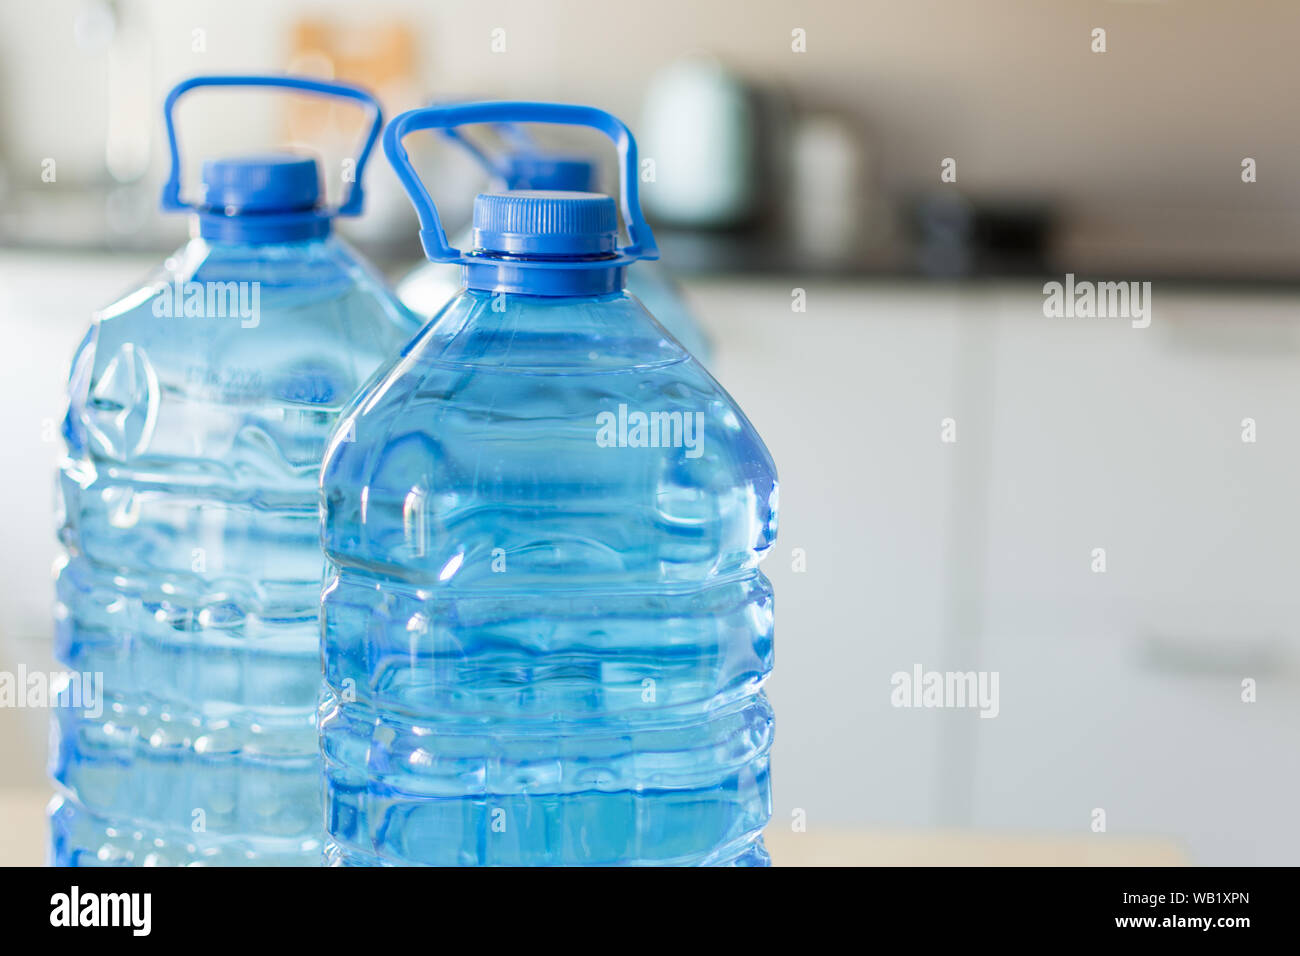 https://c8.alamy.com/comp/WB1XPN/big-plastic-bottle-with-water-on-the-table-over-bright-kitchen-backgroung-bottle-of-clear-transarent-water-in-a-blue-color-cap-and-handle-closeup-WB1XPN.jpg